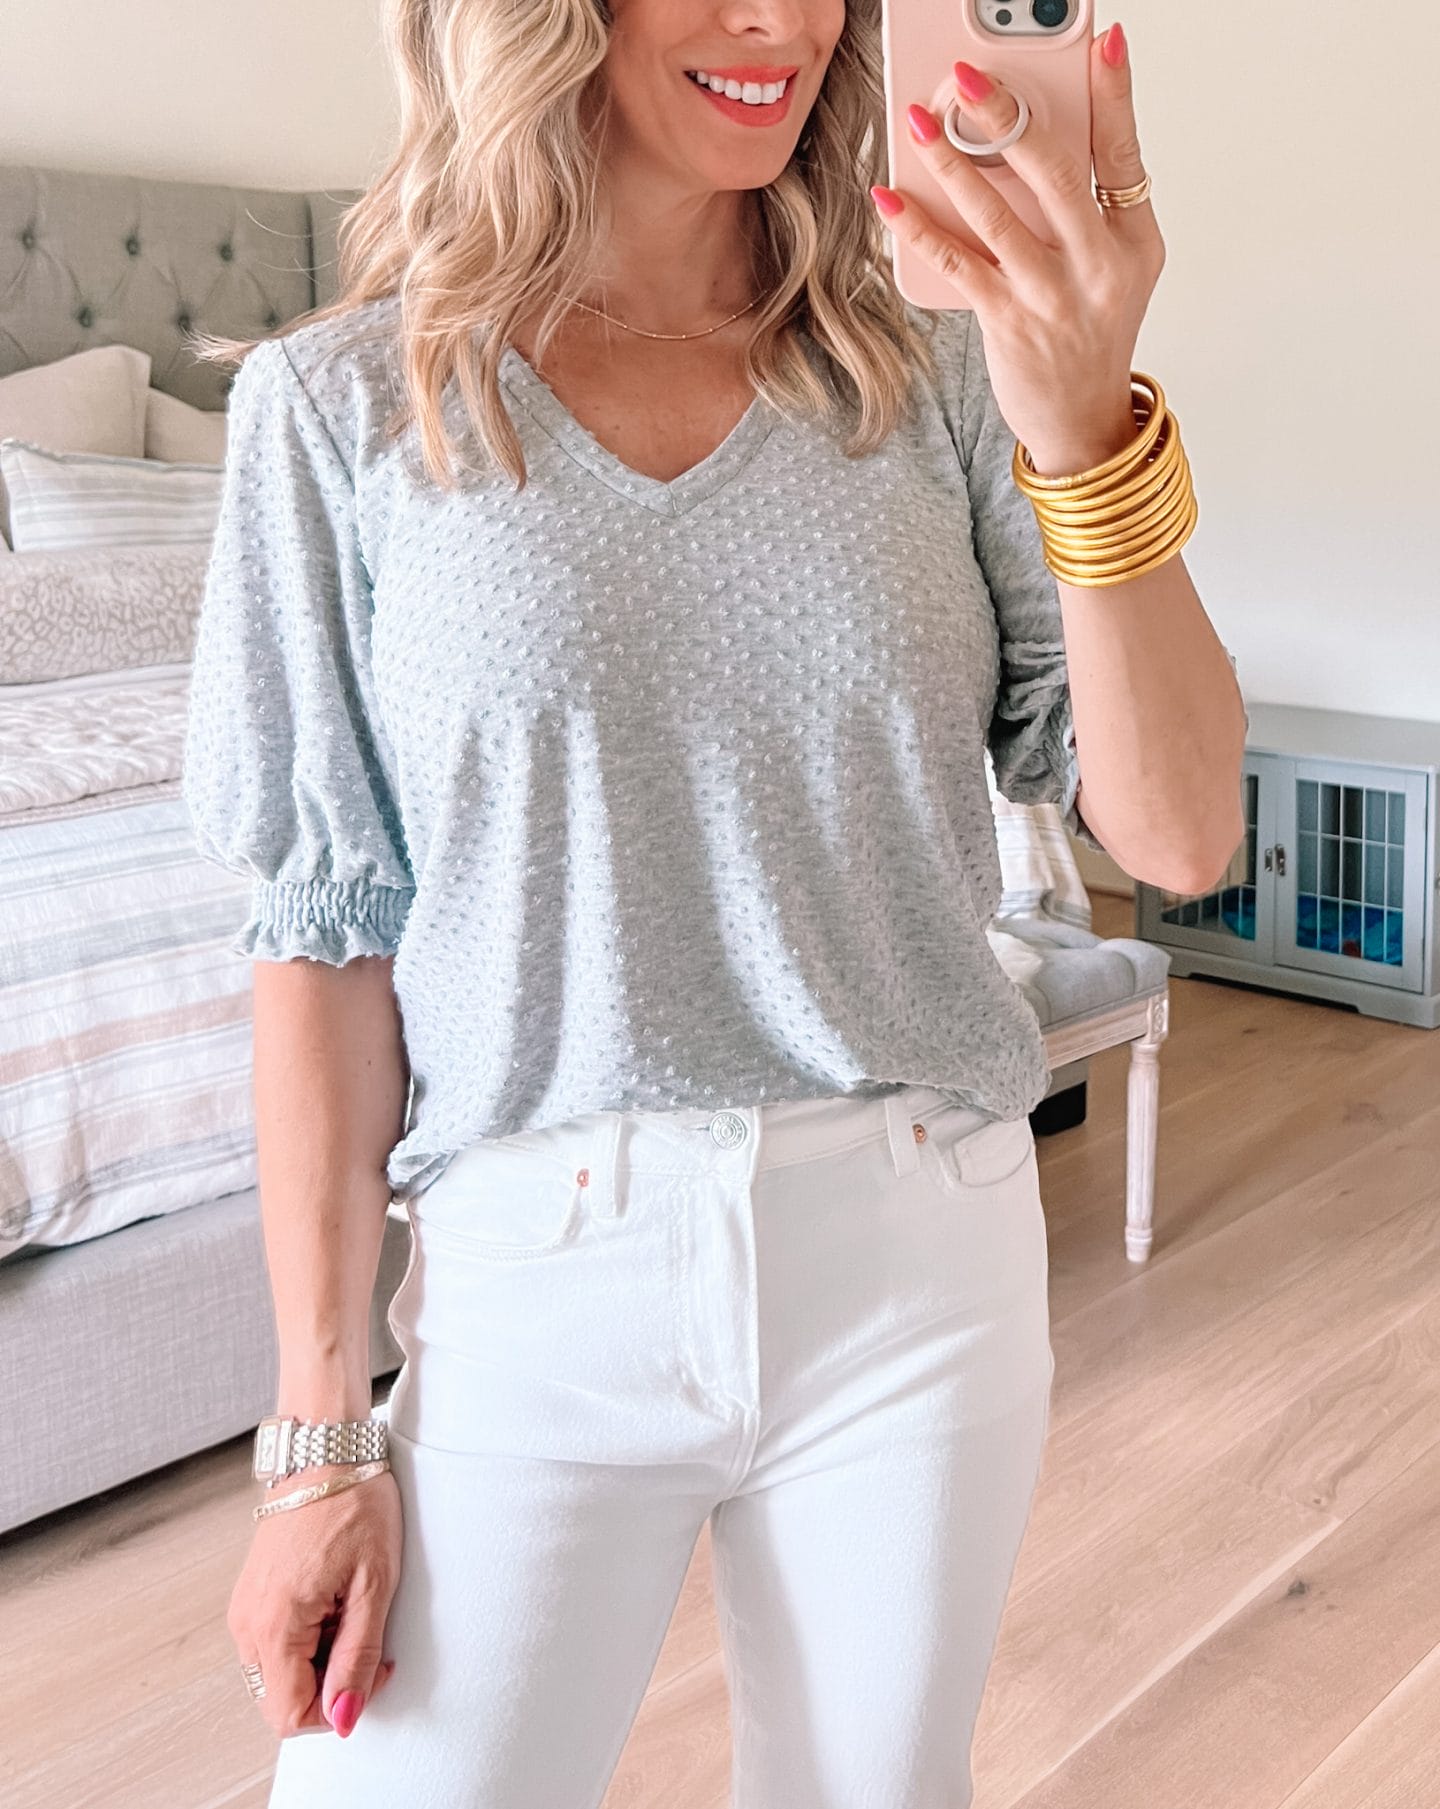 Puff Sleeve Top, jeans, wedges 